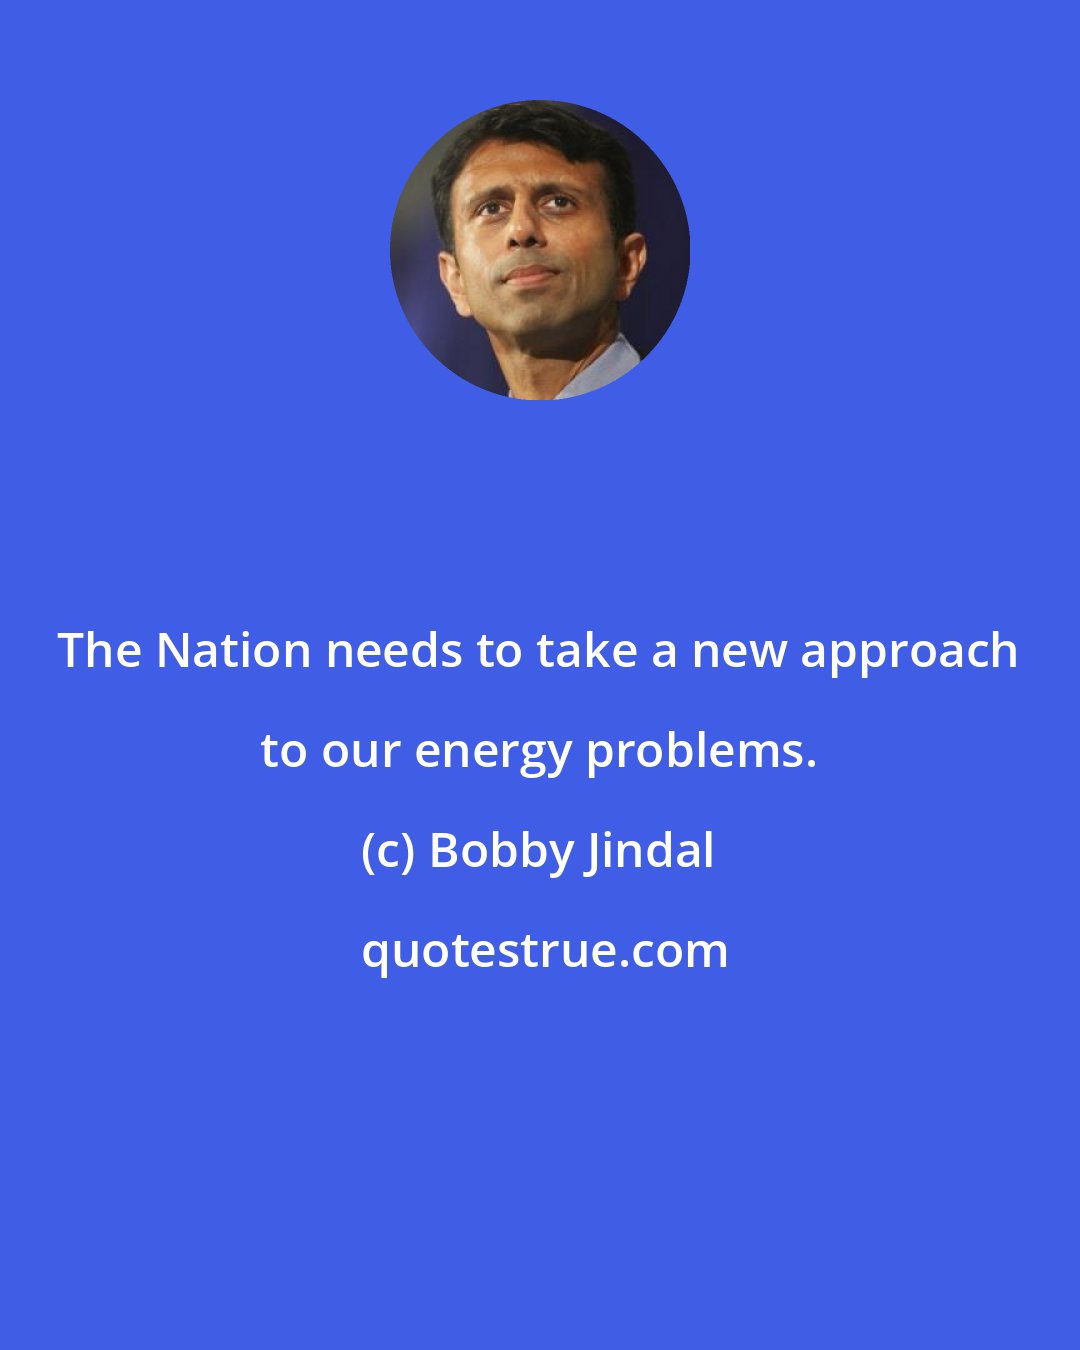 Bobby Jindal: The Nation needs to take a new approach to our energy problems.